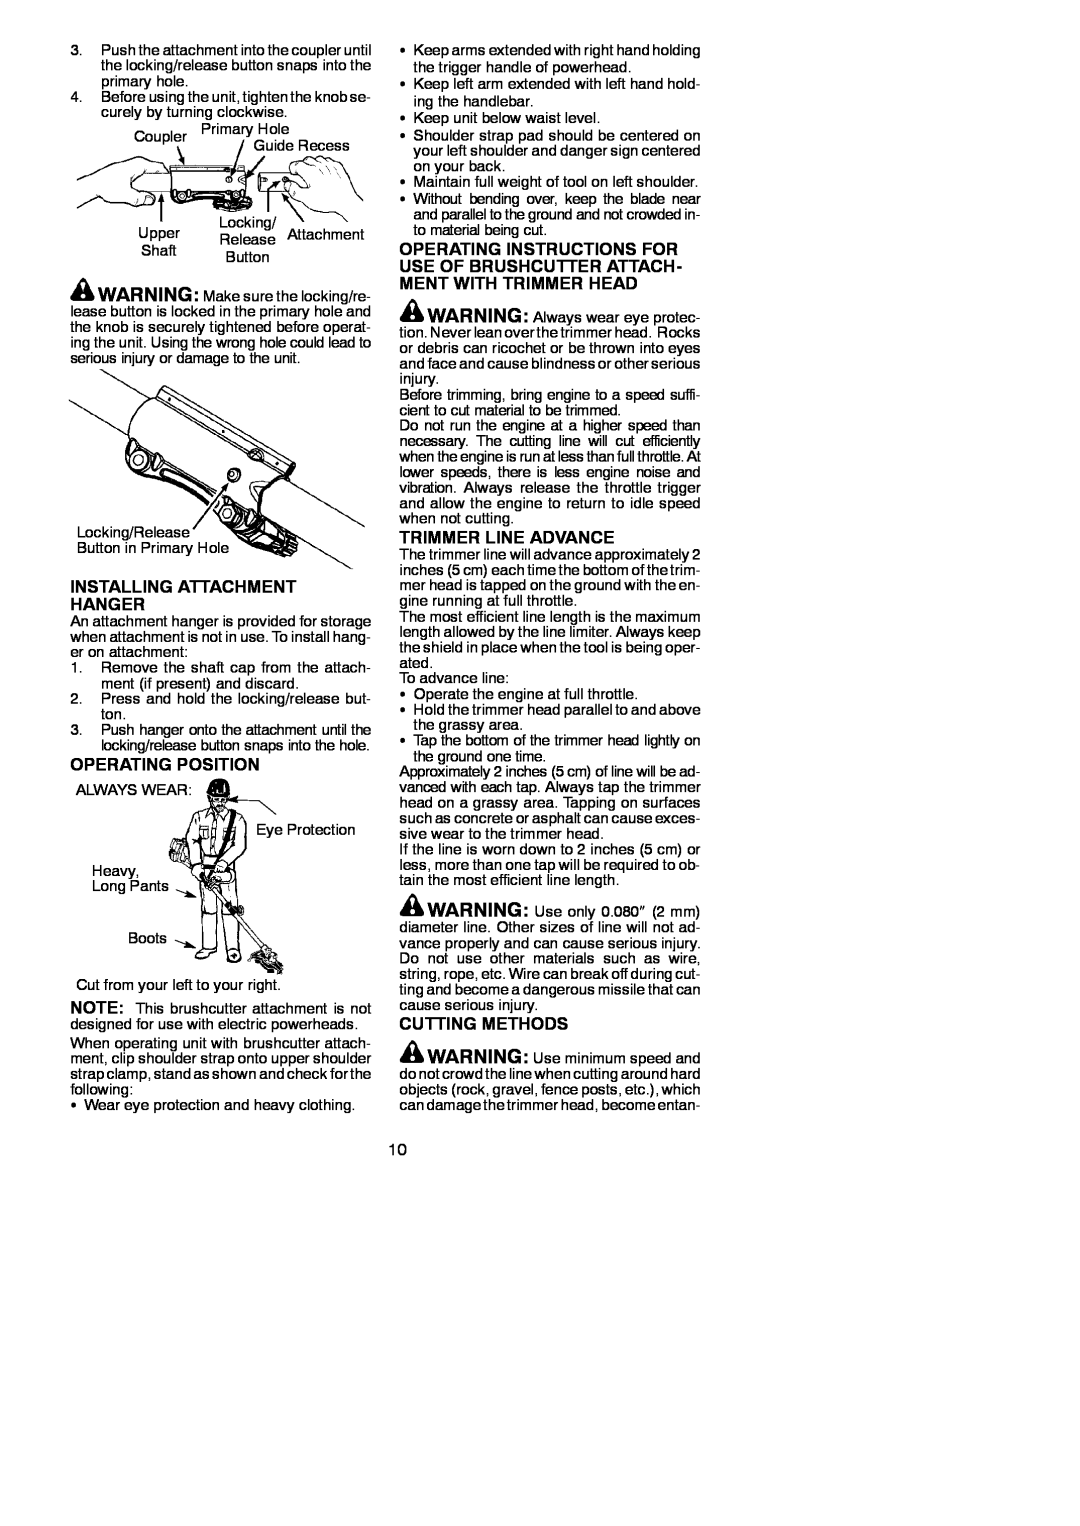 Poulan 952711828, 545212832 Installing Attachment Hanger, Operating Position, Trimmer Line Advance, Cutting Methods 